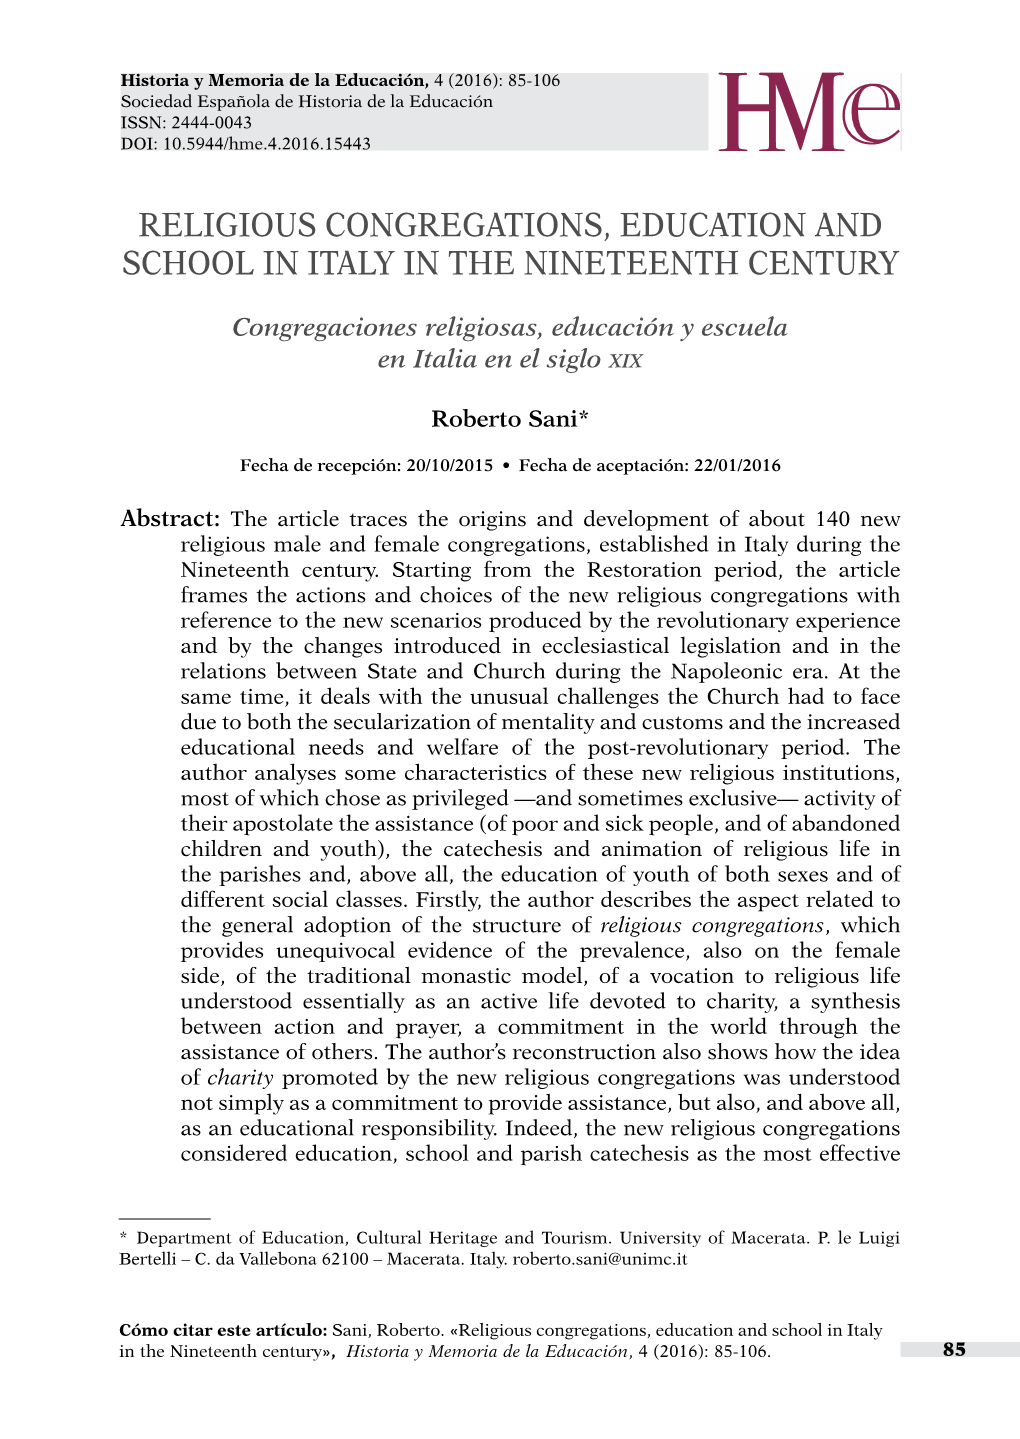 Religious Congregations, Education and School in Italy in the Nineteenth Century